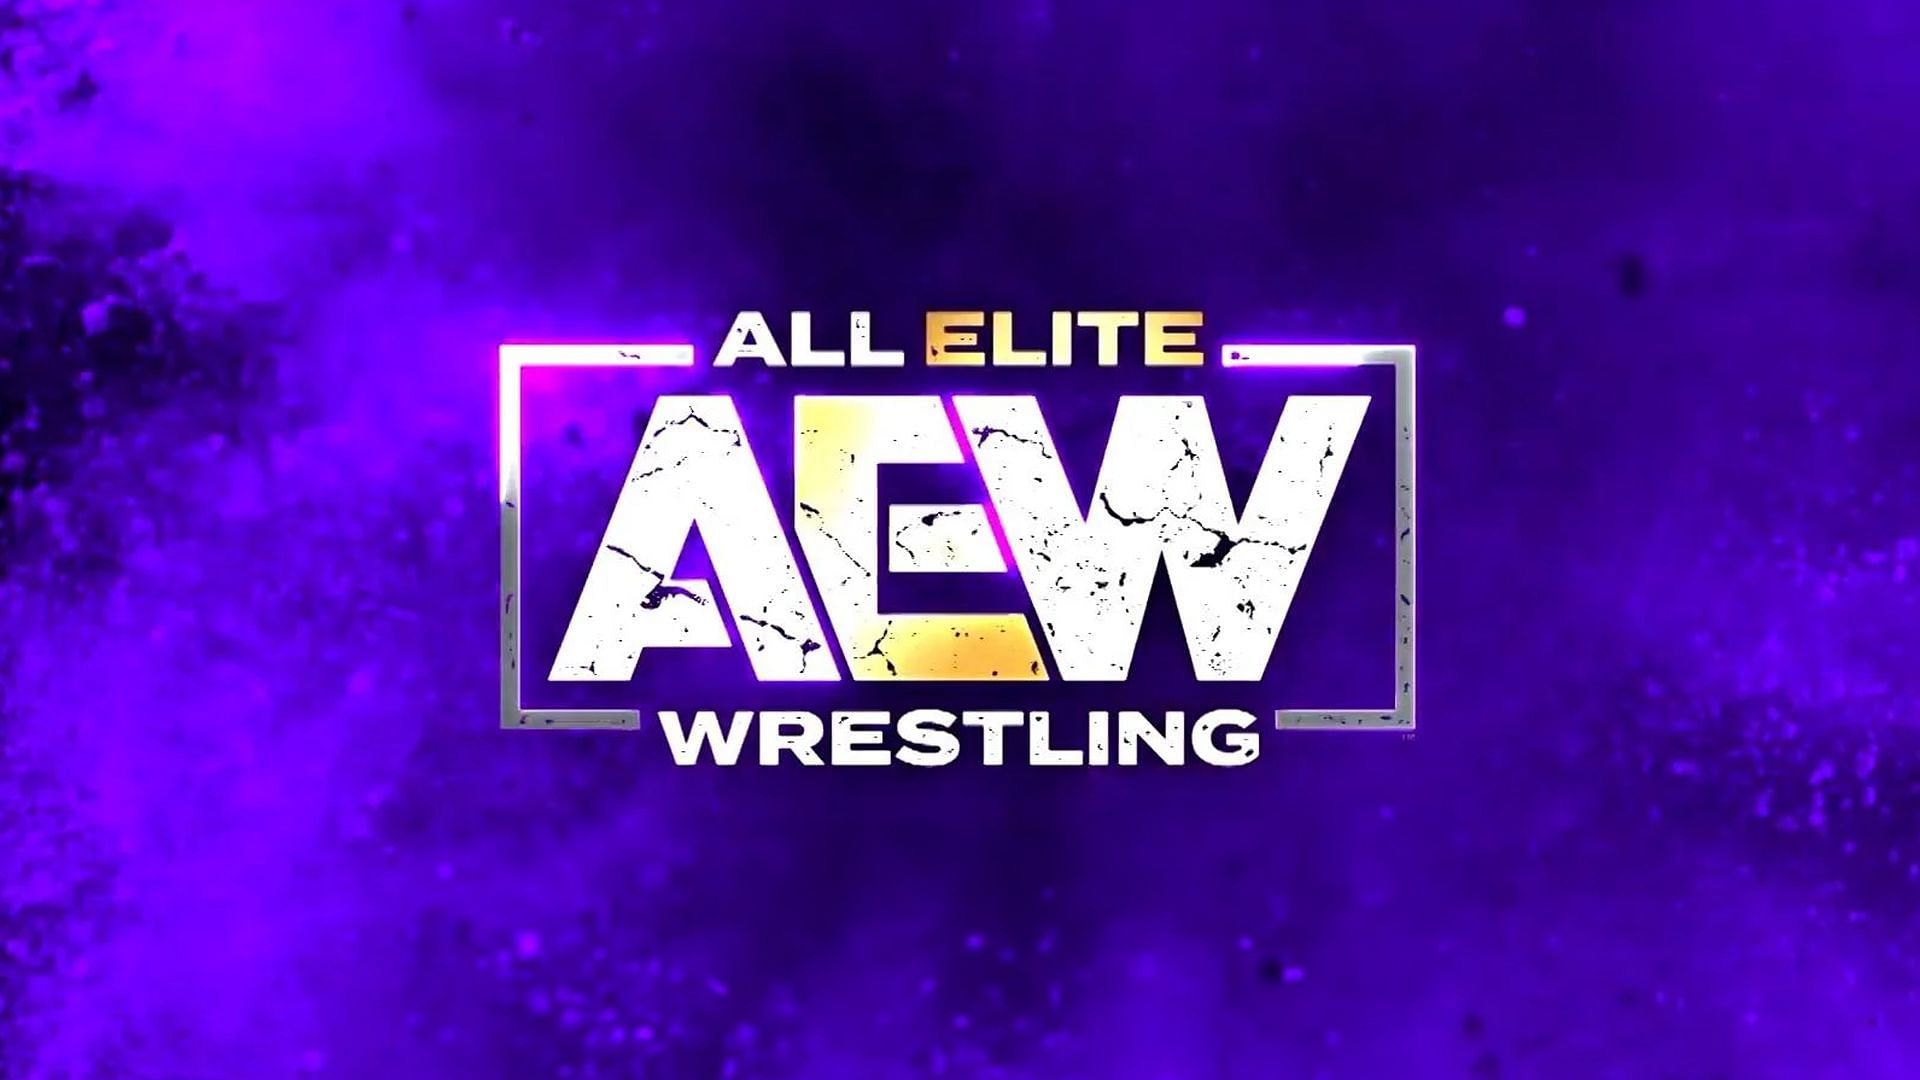 AEW has seen several departures as its foundational stars